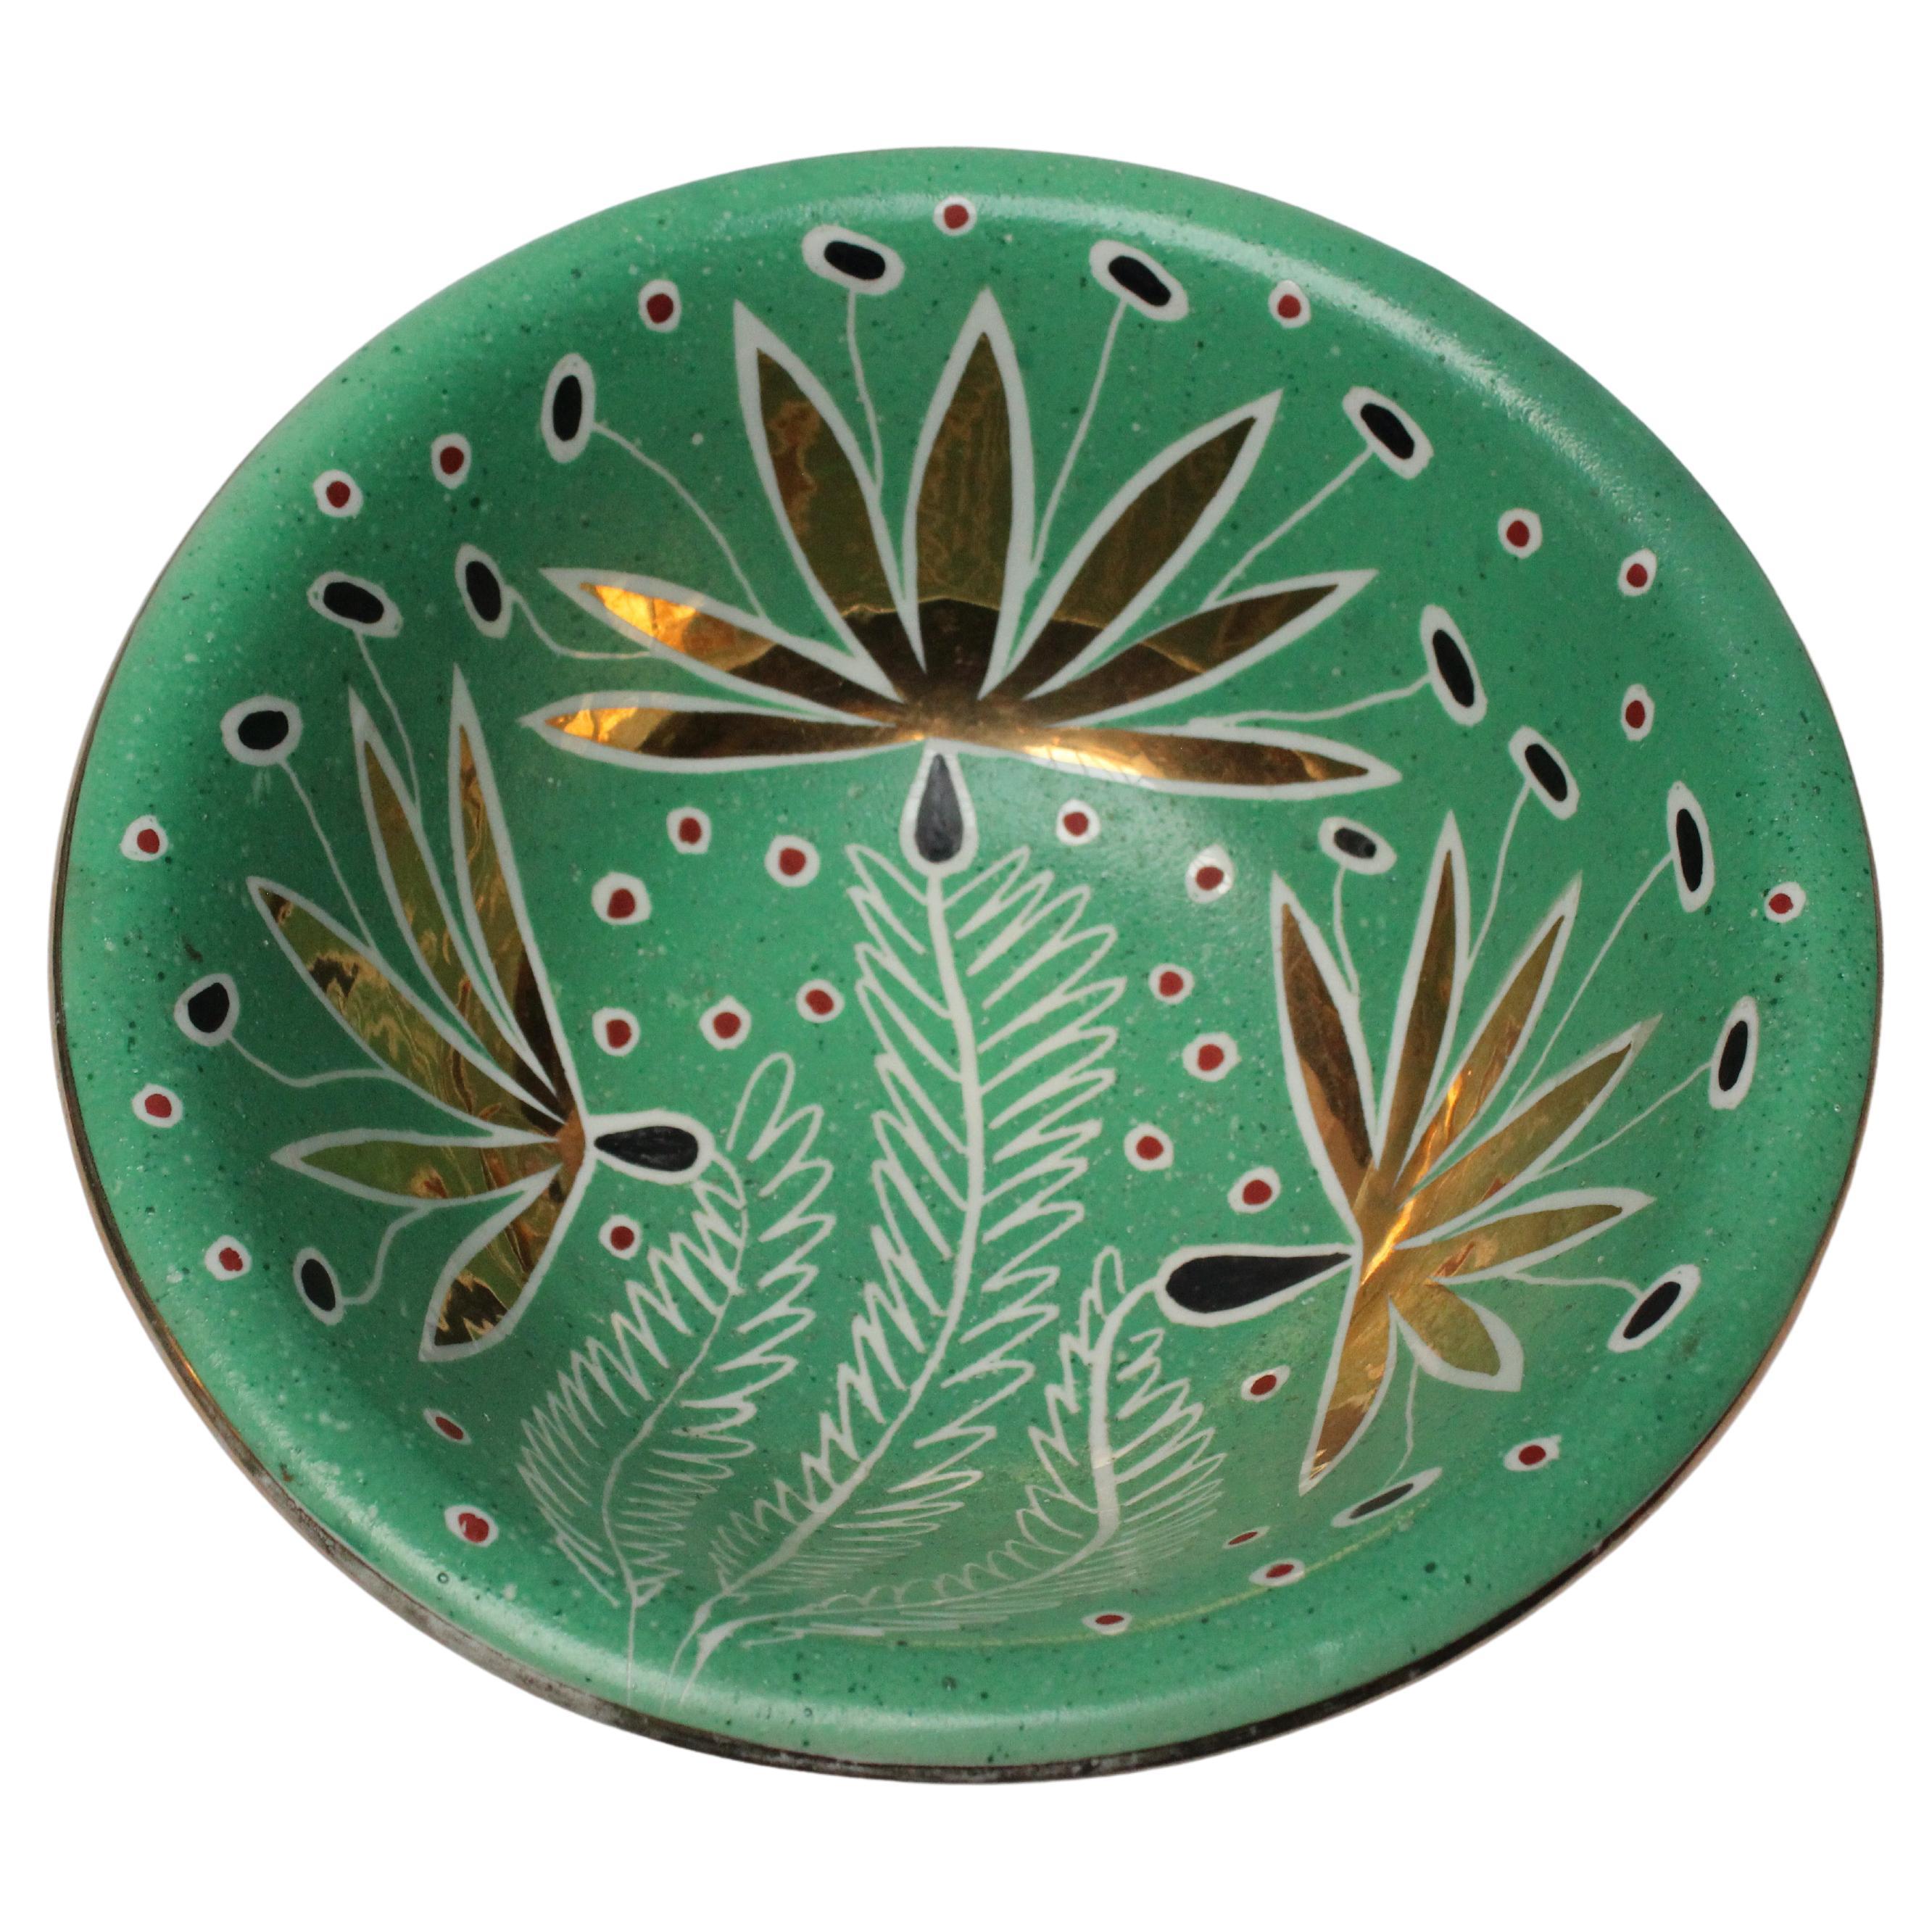 Art Deco Mint Green and Gold Leaf Ceramic Bowl by Waylande Gregory For Sale